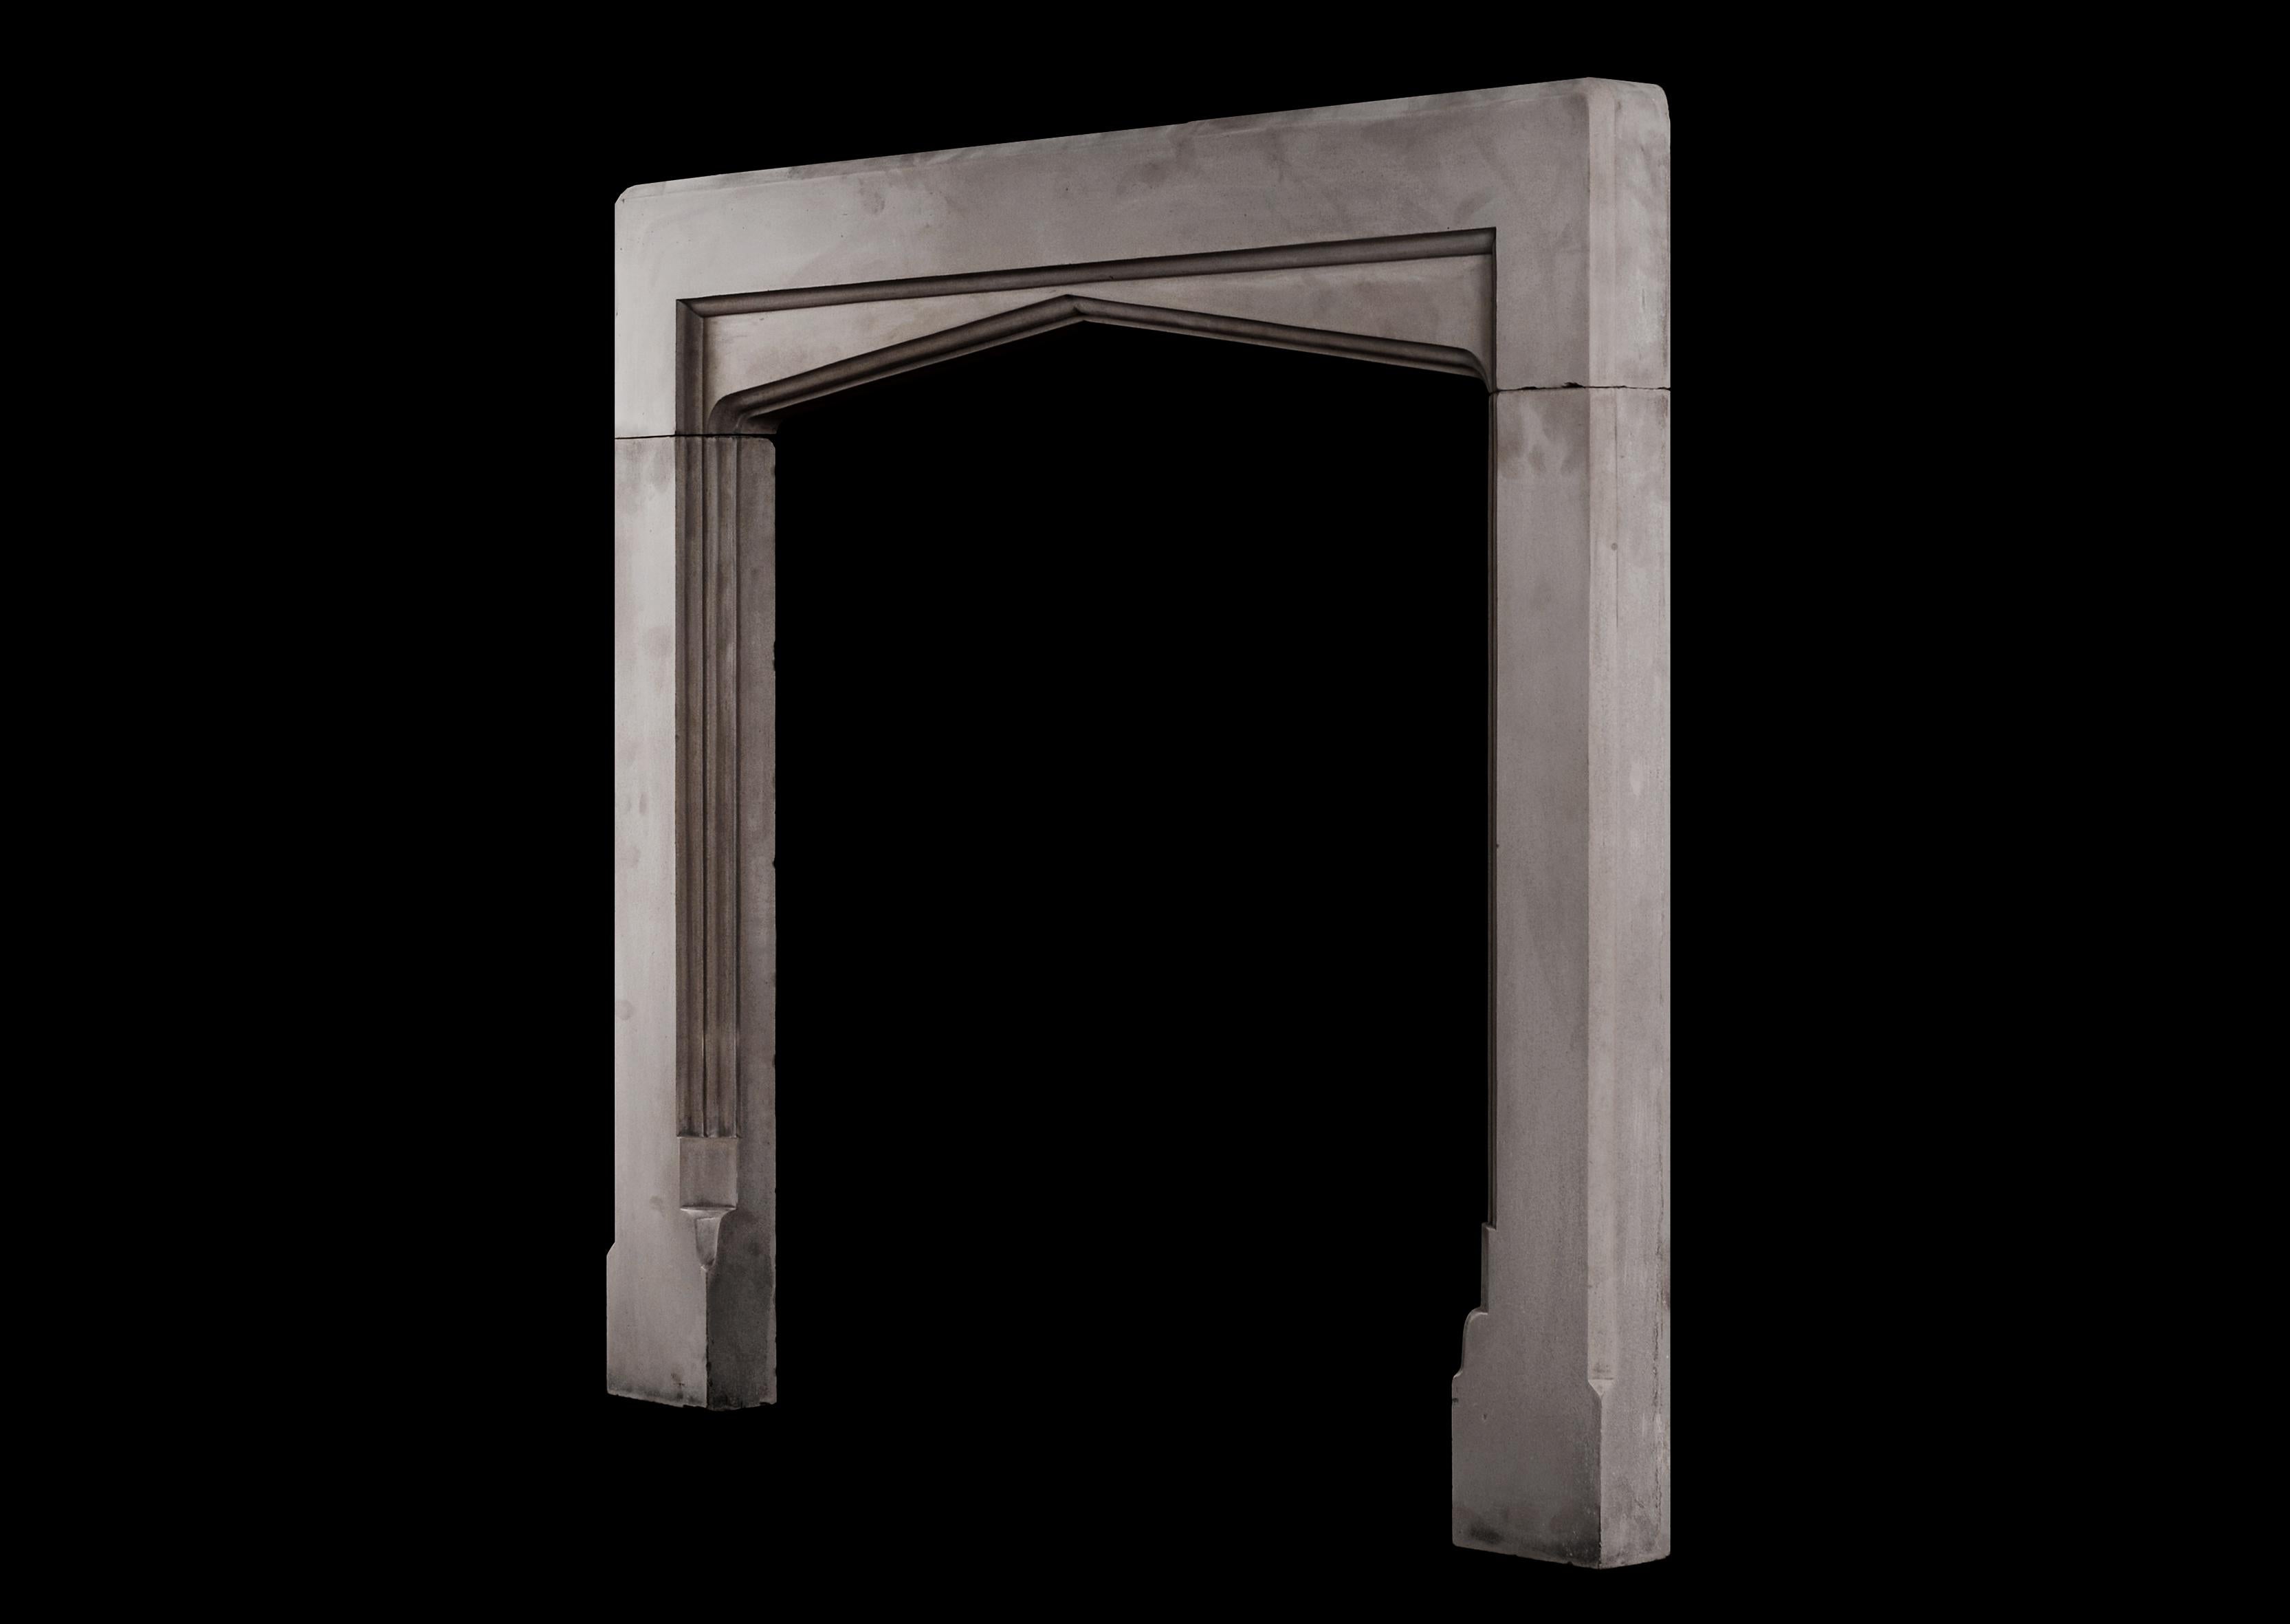 Small Gothic Style Fireplace in Purbeck Stone In Good Condition For Sale In London, GB